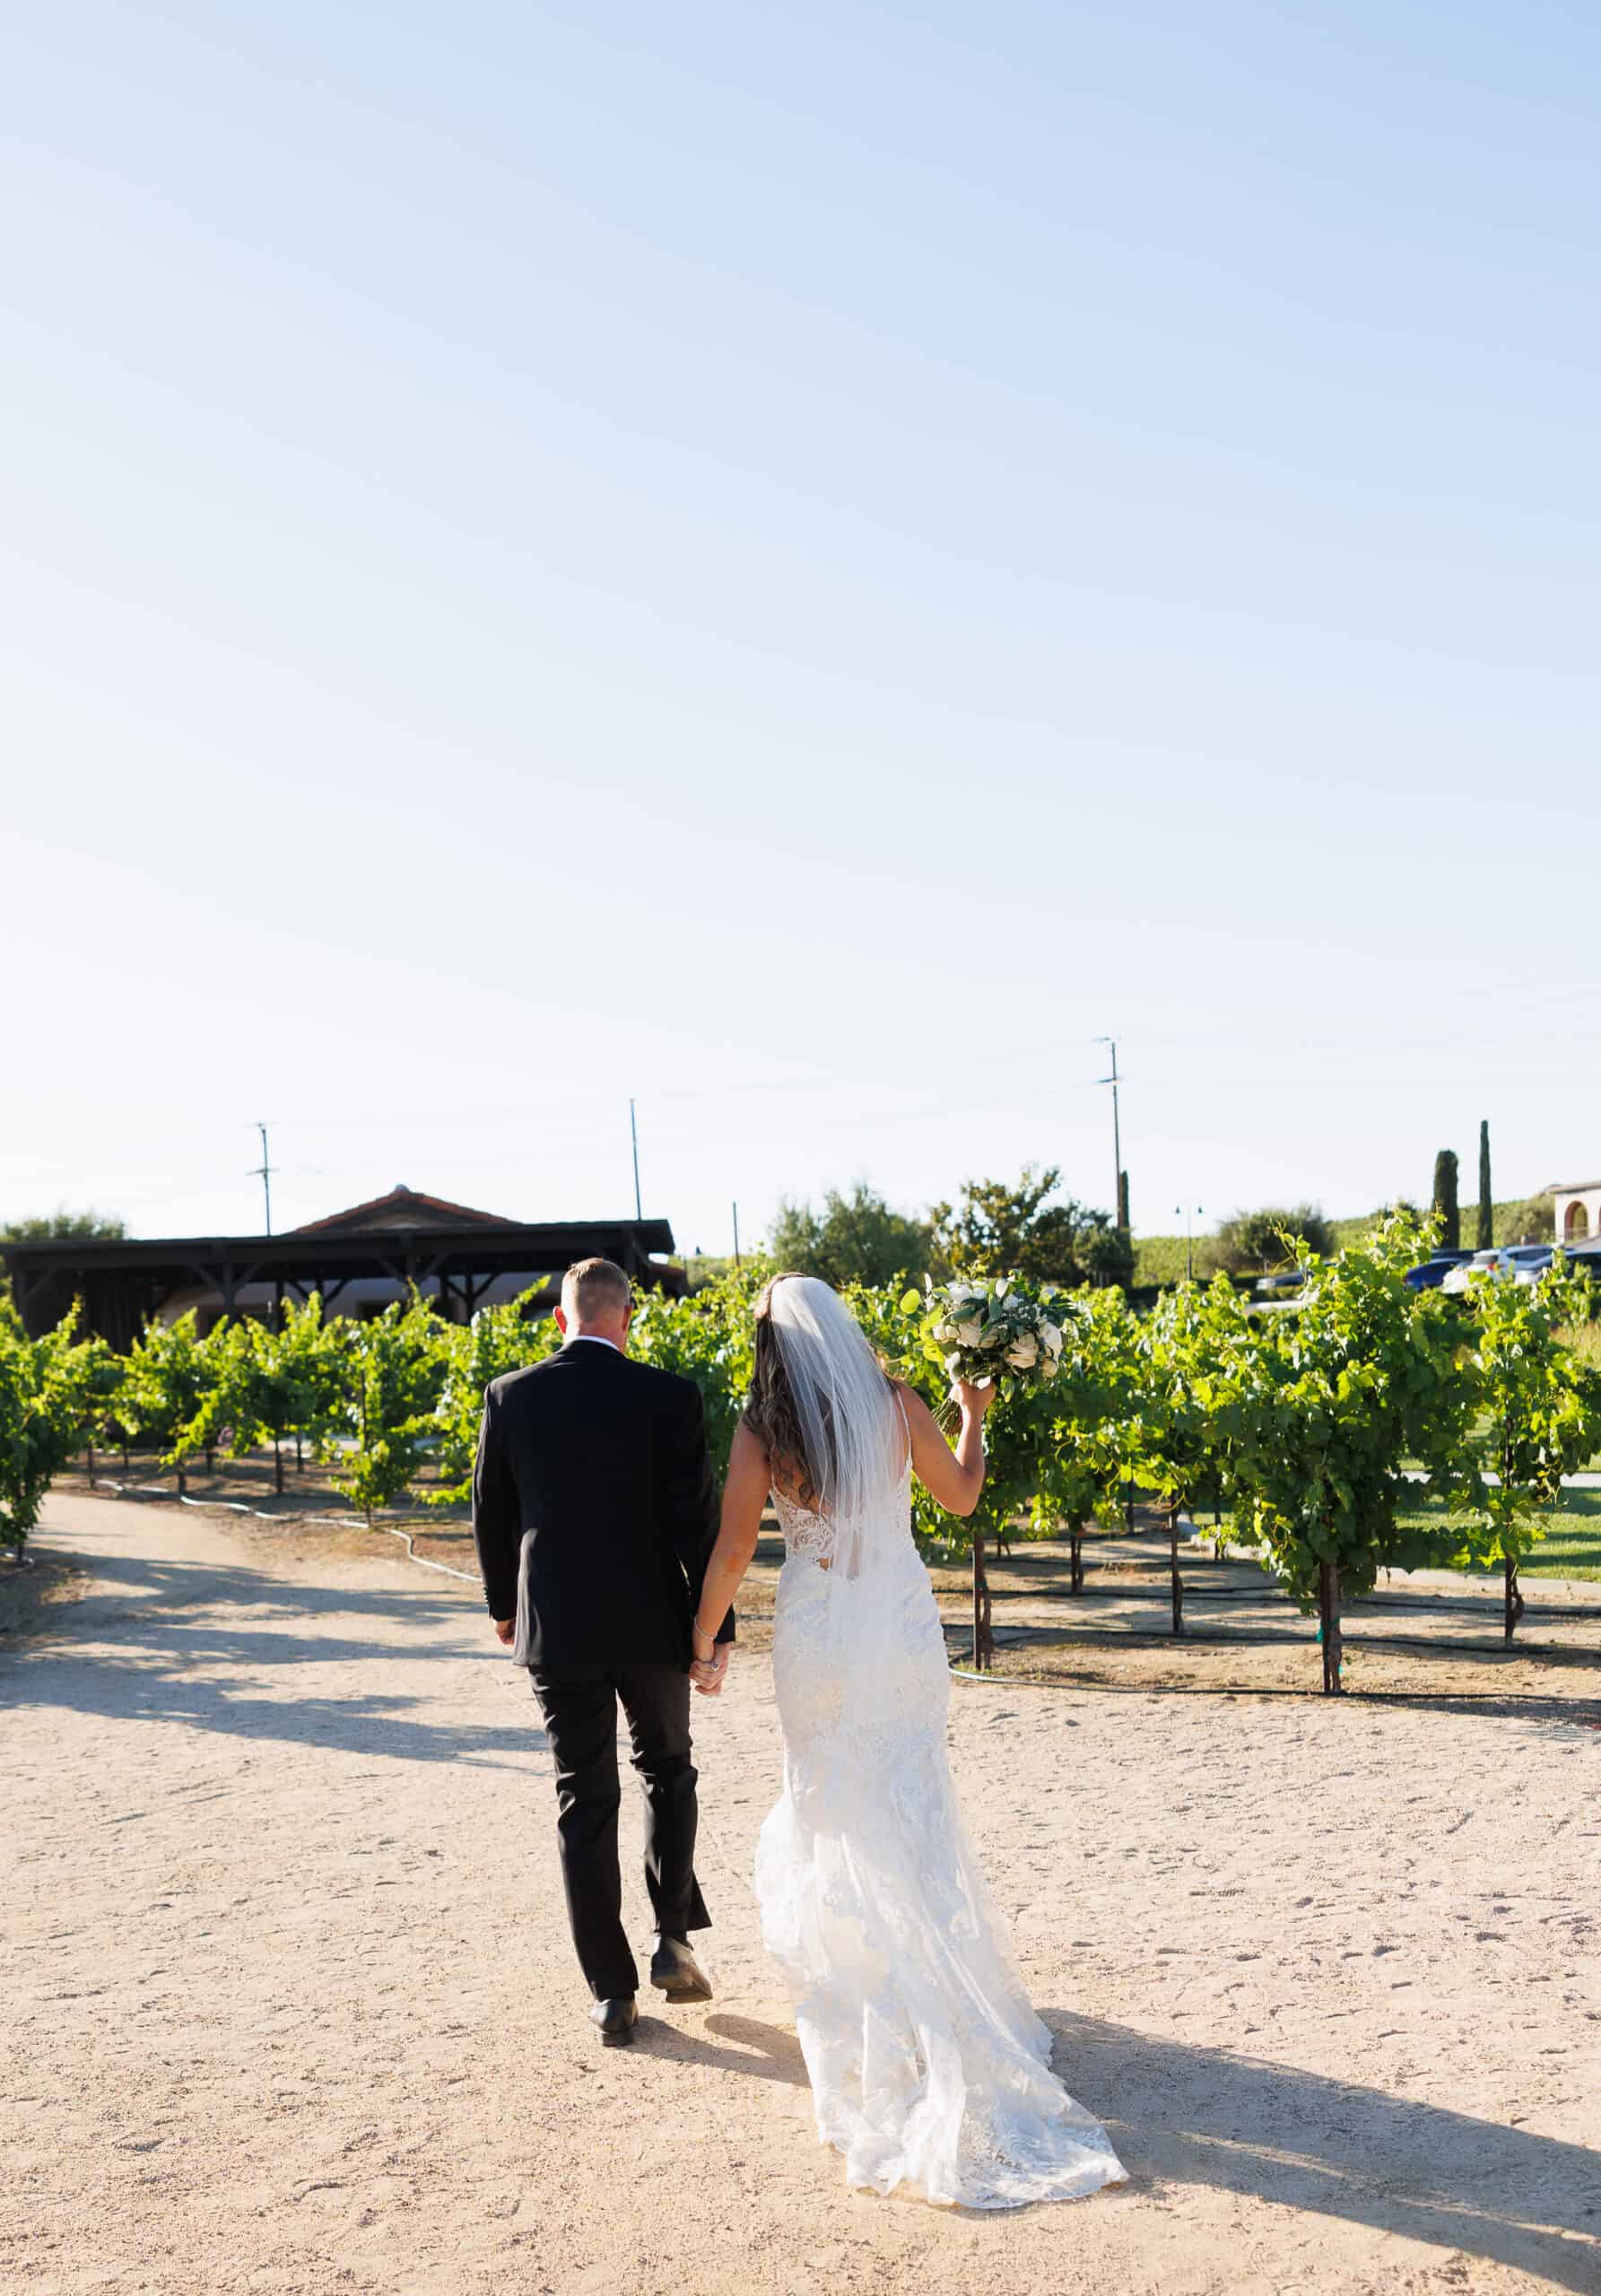 Everything You Need to Know About Getting Married in Temecula